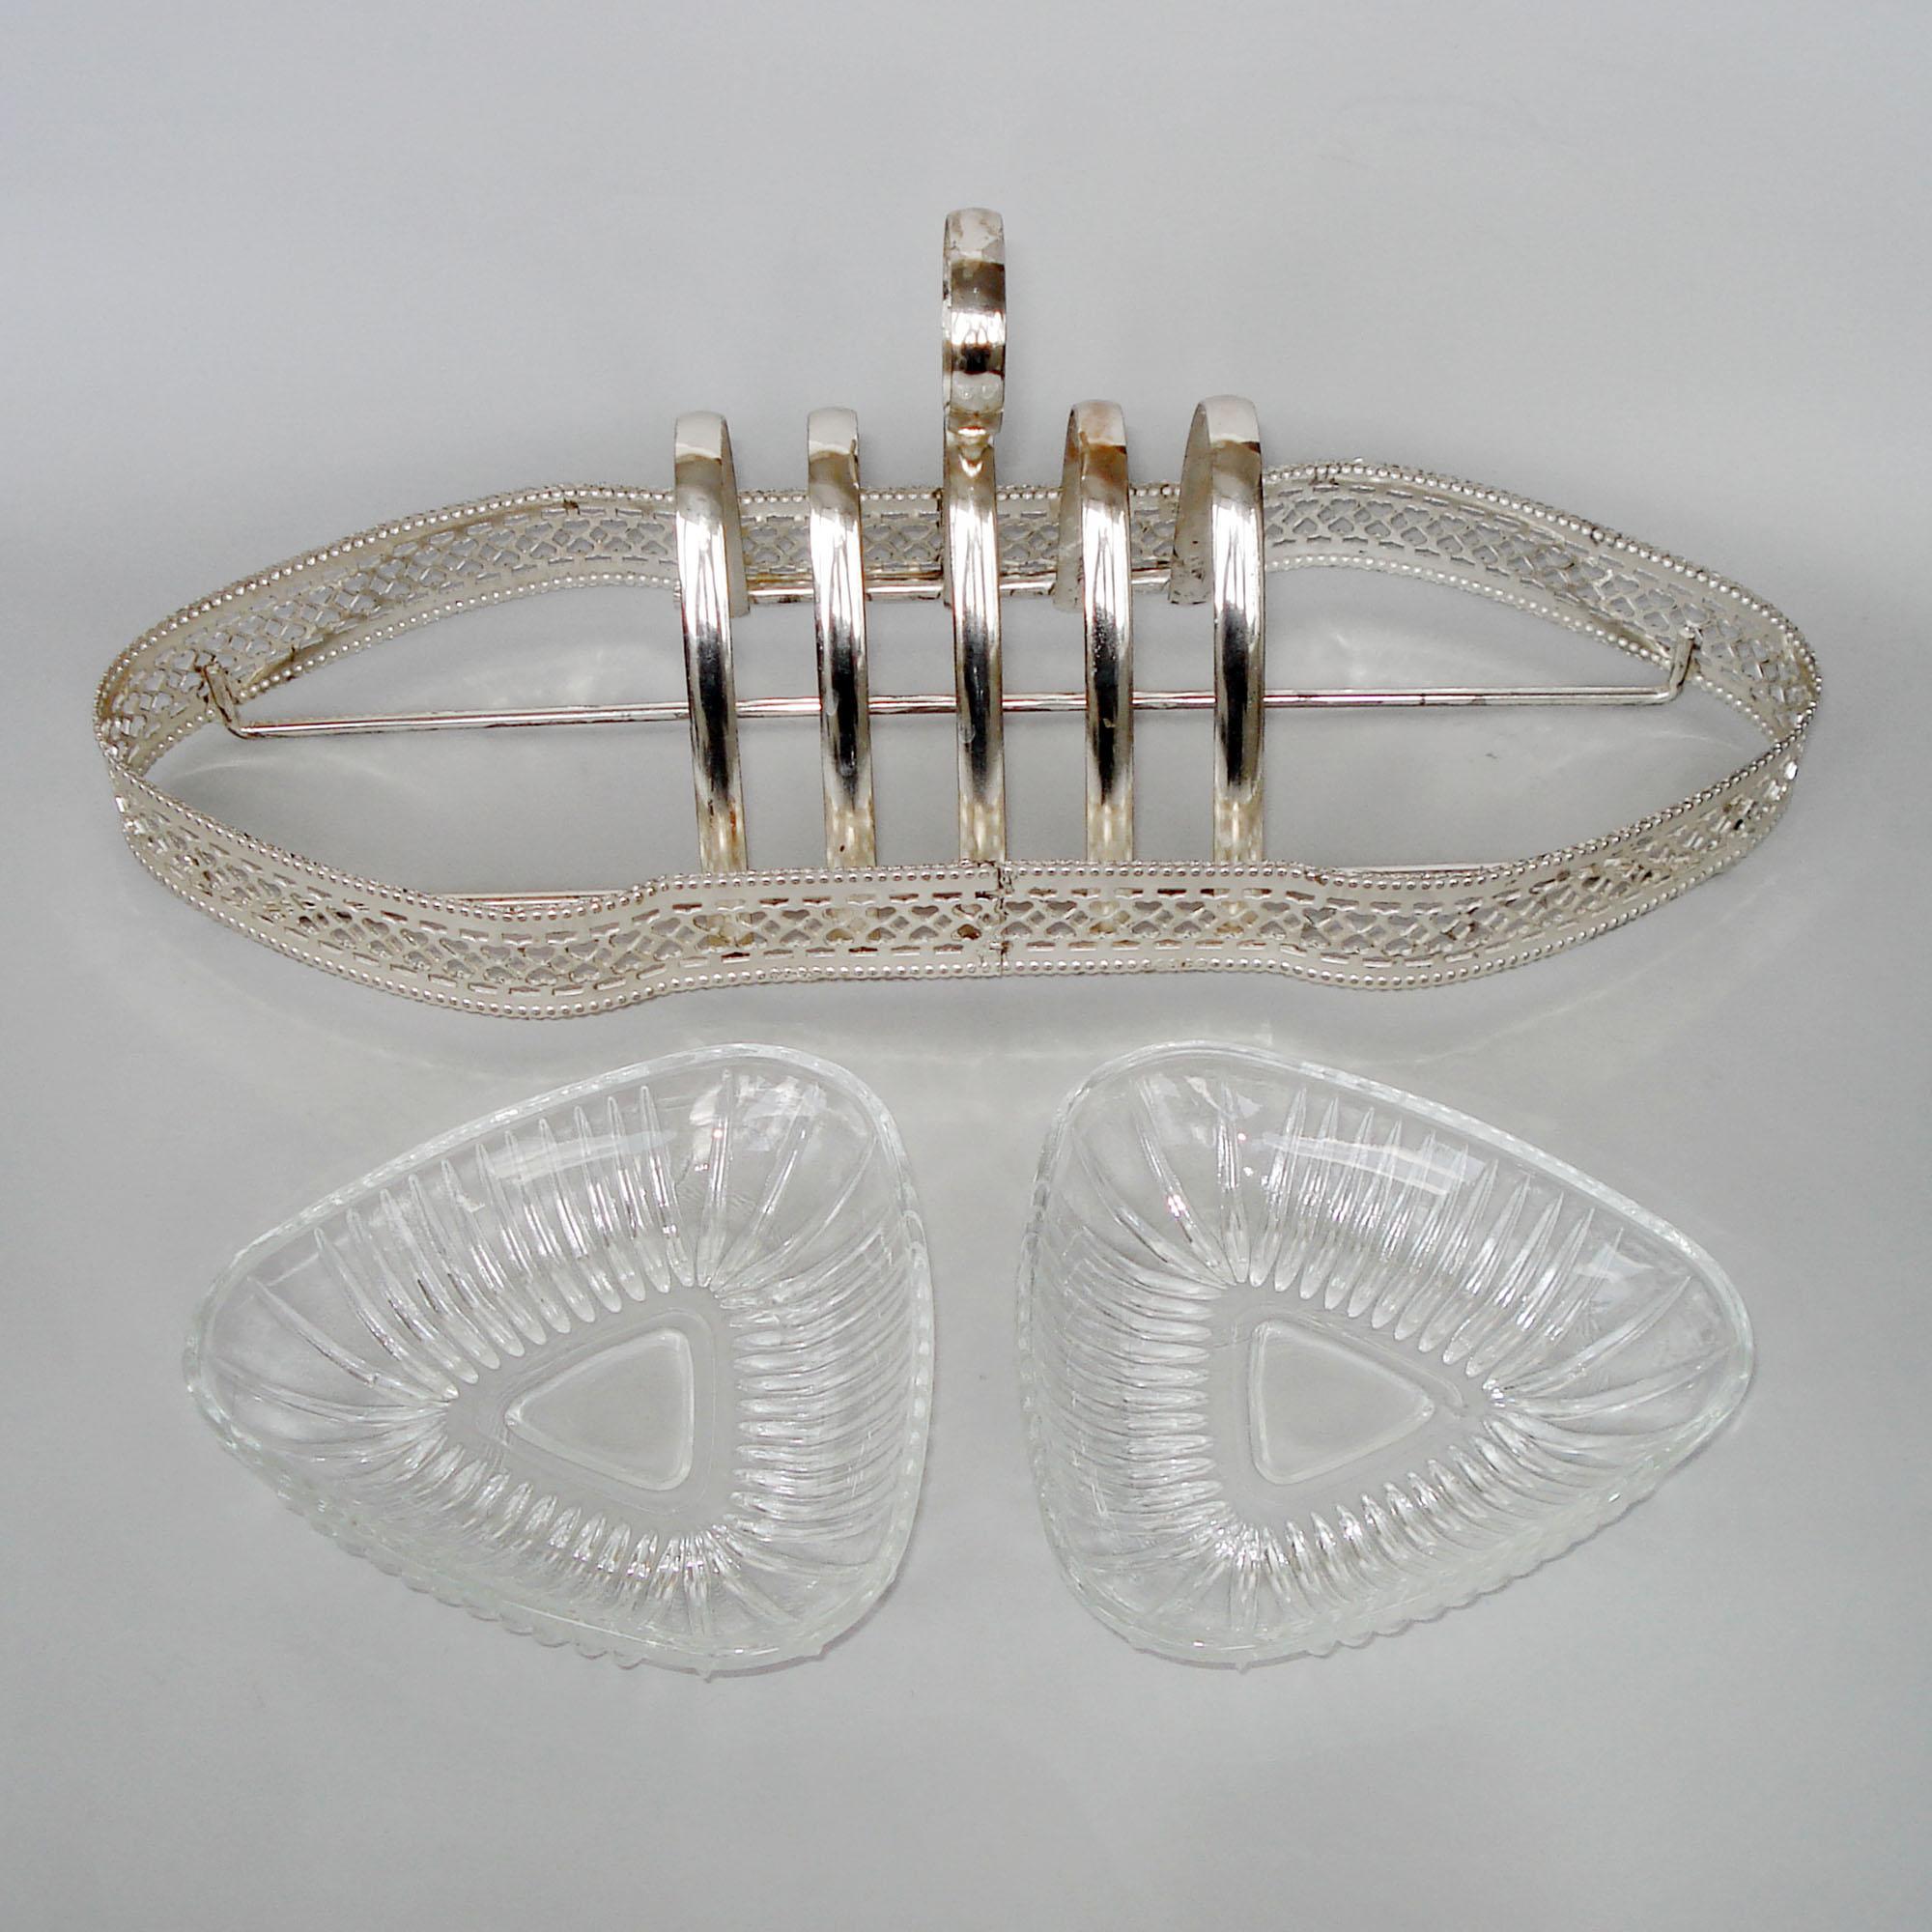 European Vintage French Art Deco Toast Rack with Jam and Butter Dishes